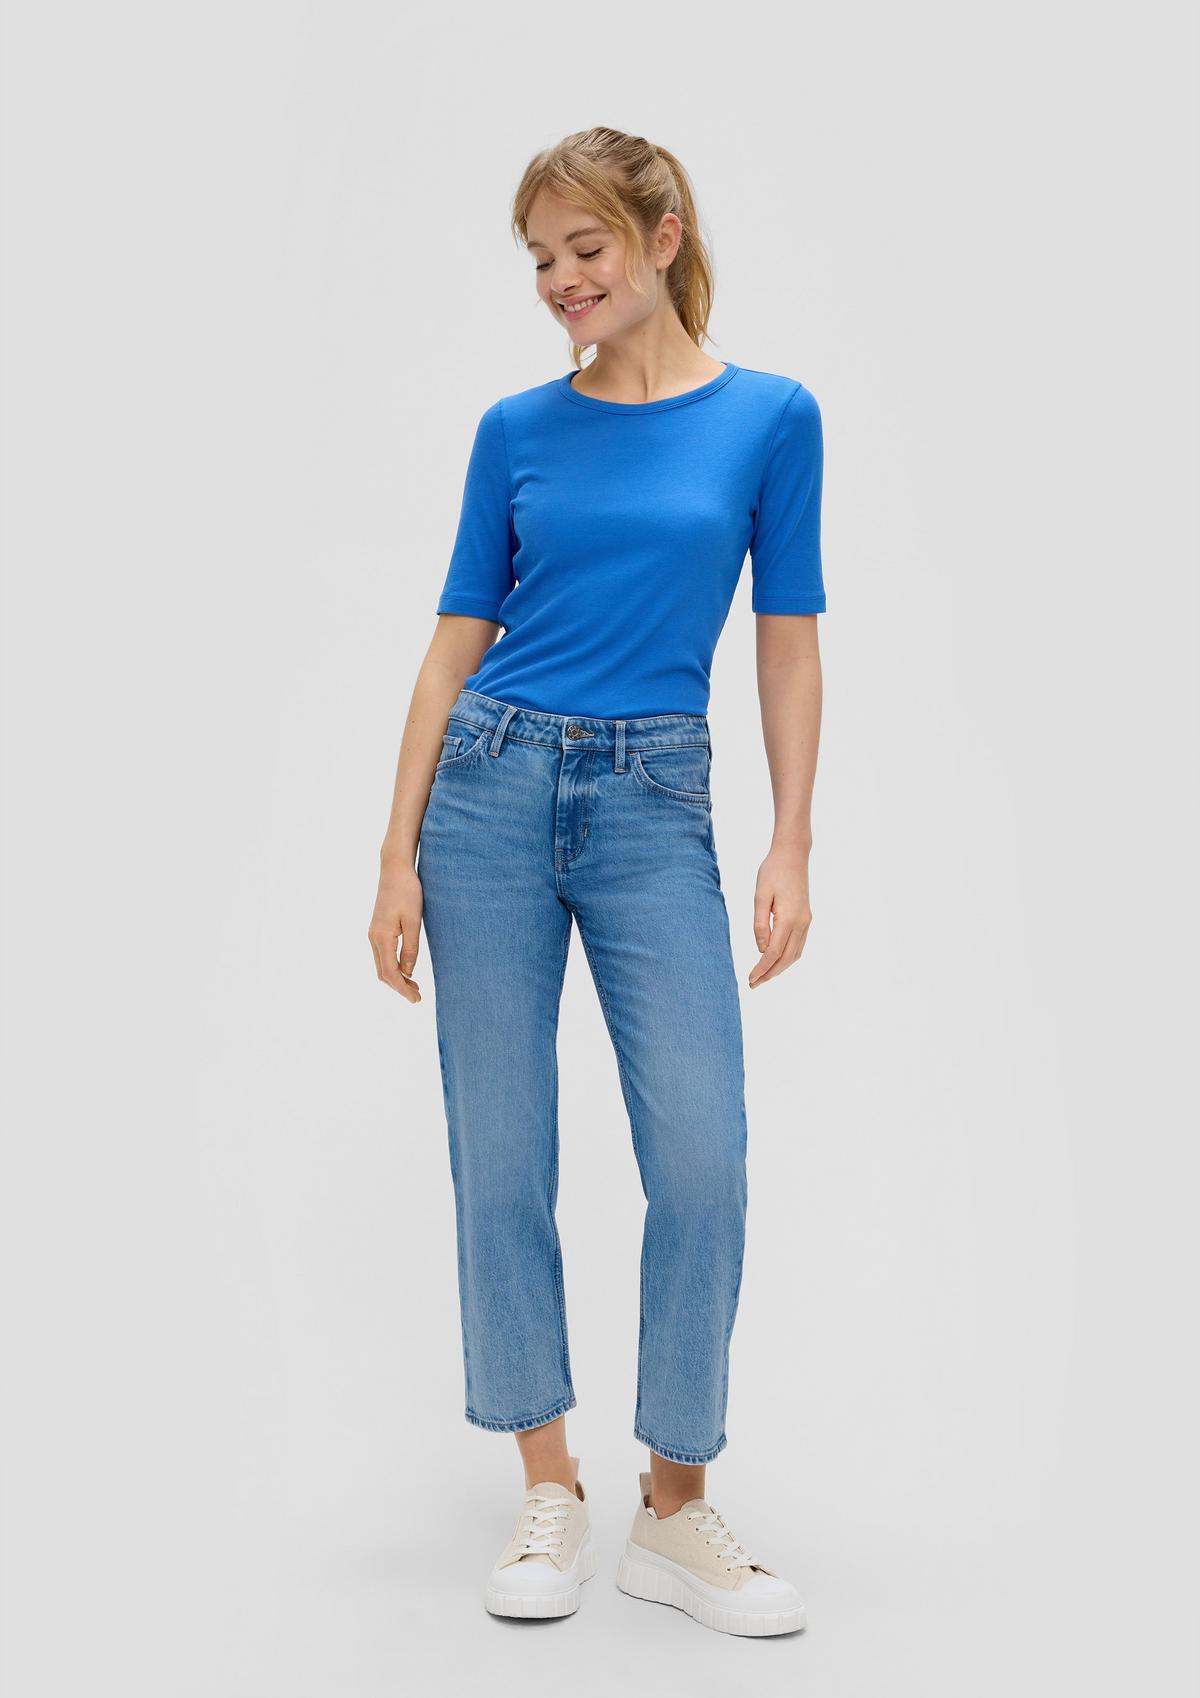 s.Oliver Cropped Jeans Karolin / Regular Fit / Mid Rise / Straight Leg / All-over-Muster